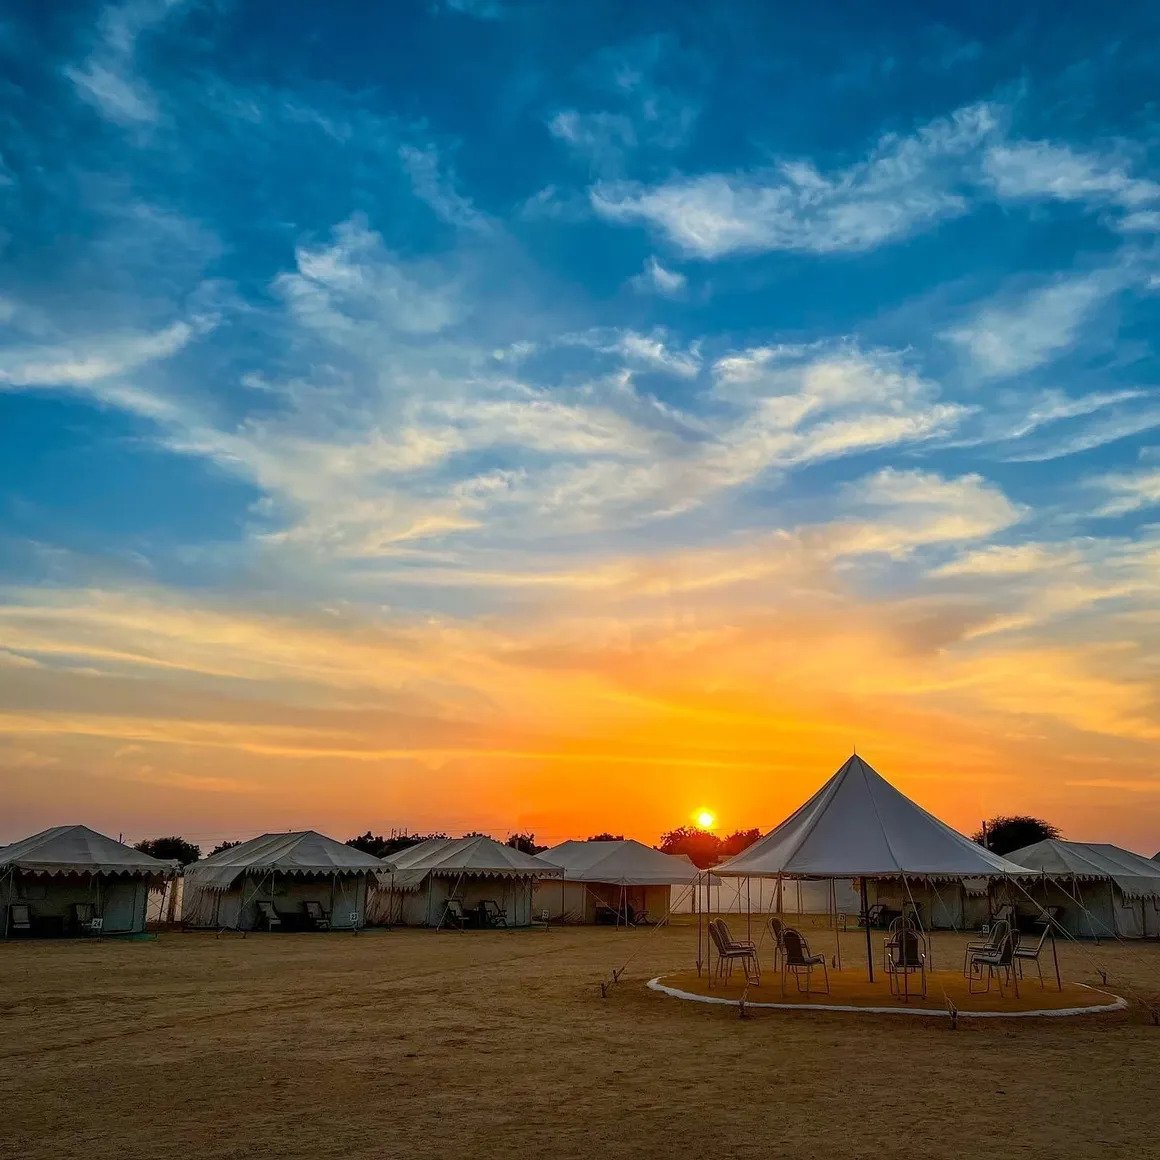 The Jaisalmer Desert Festival takes place in the month of February and is a three day riot of activity